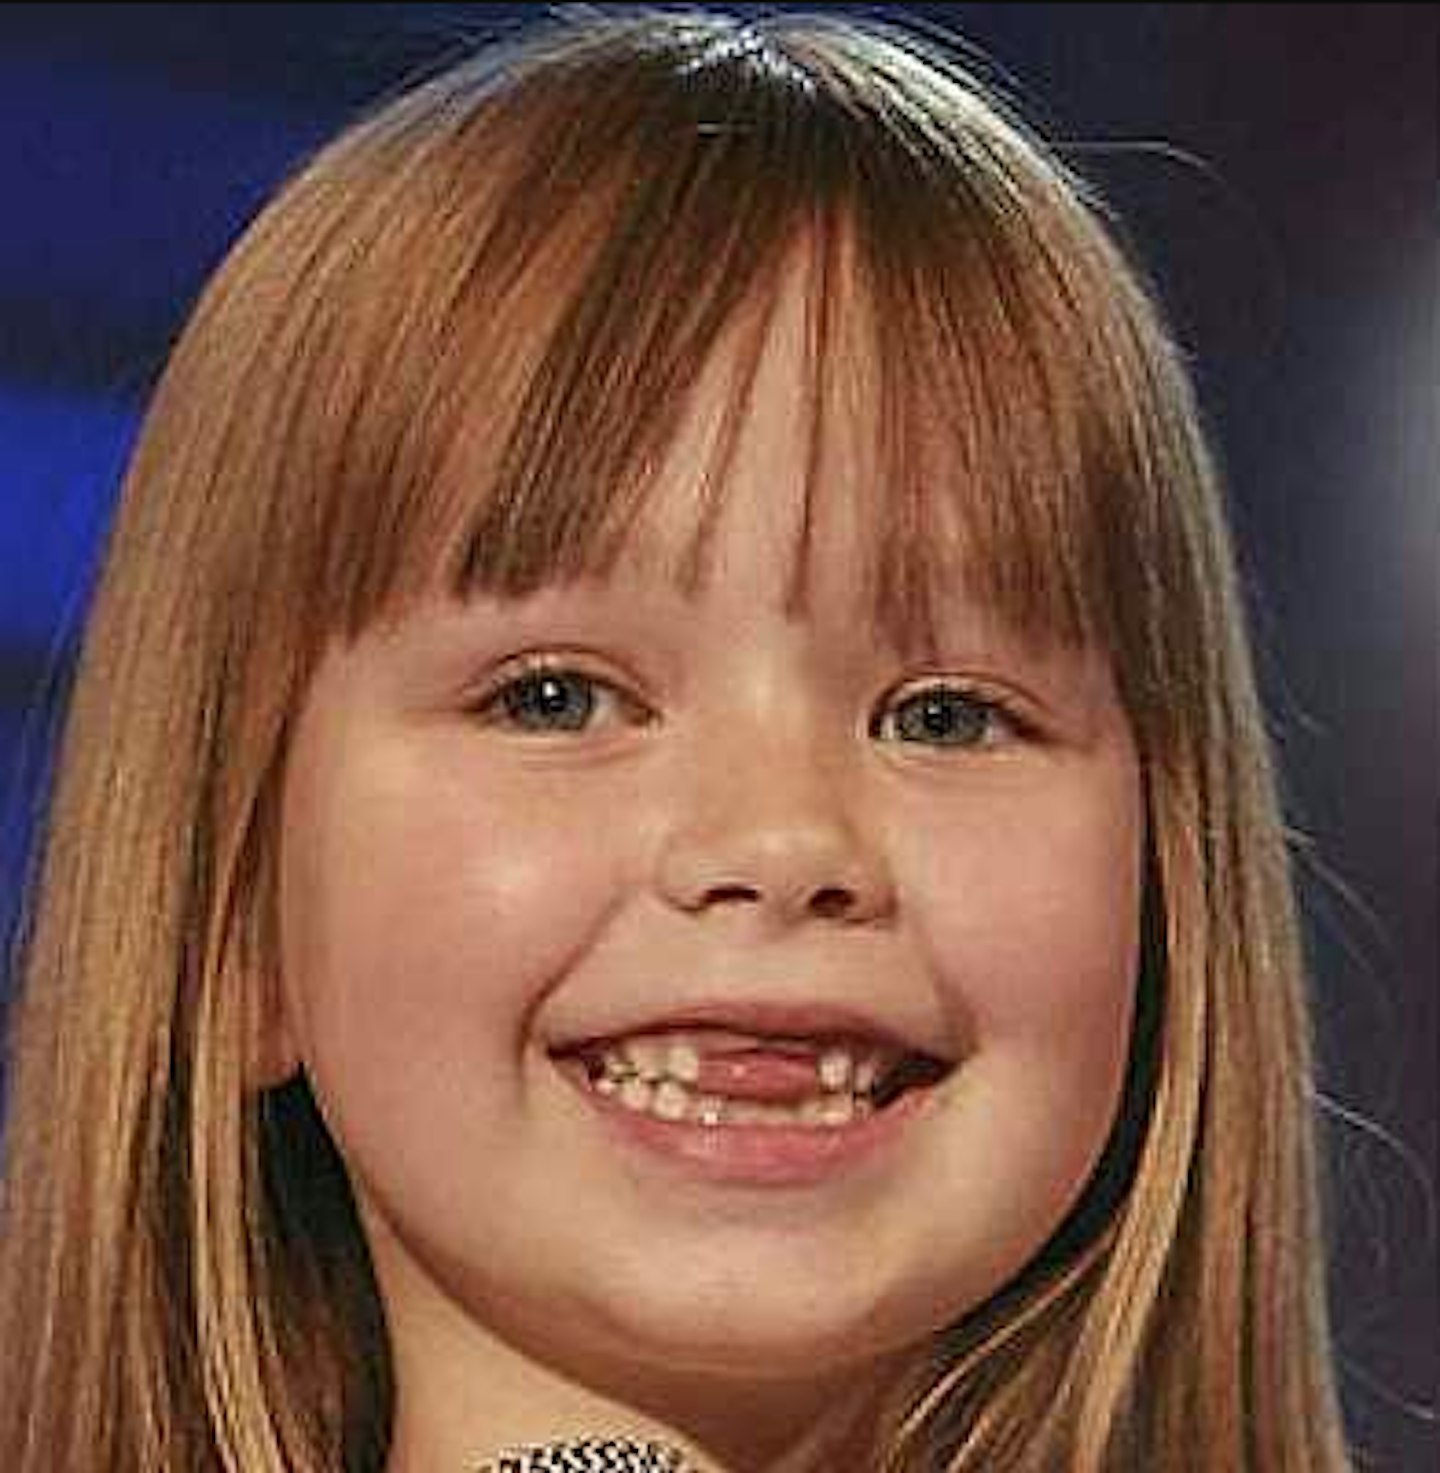 When was Connie Talbot on Britain's Got Talent and how old was